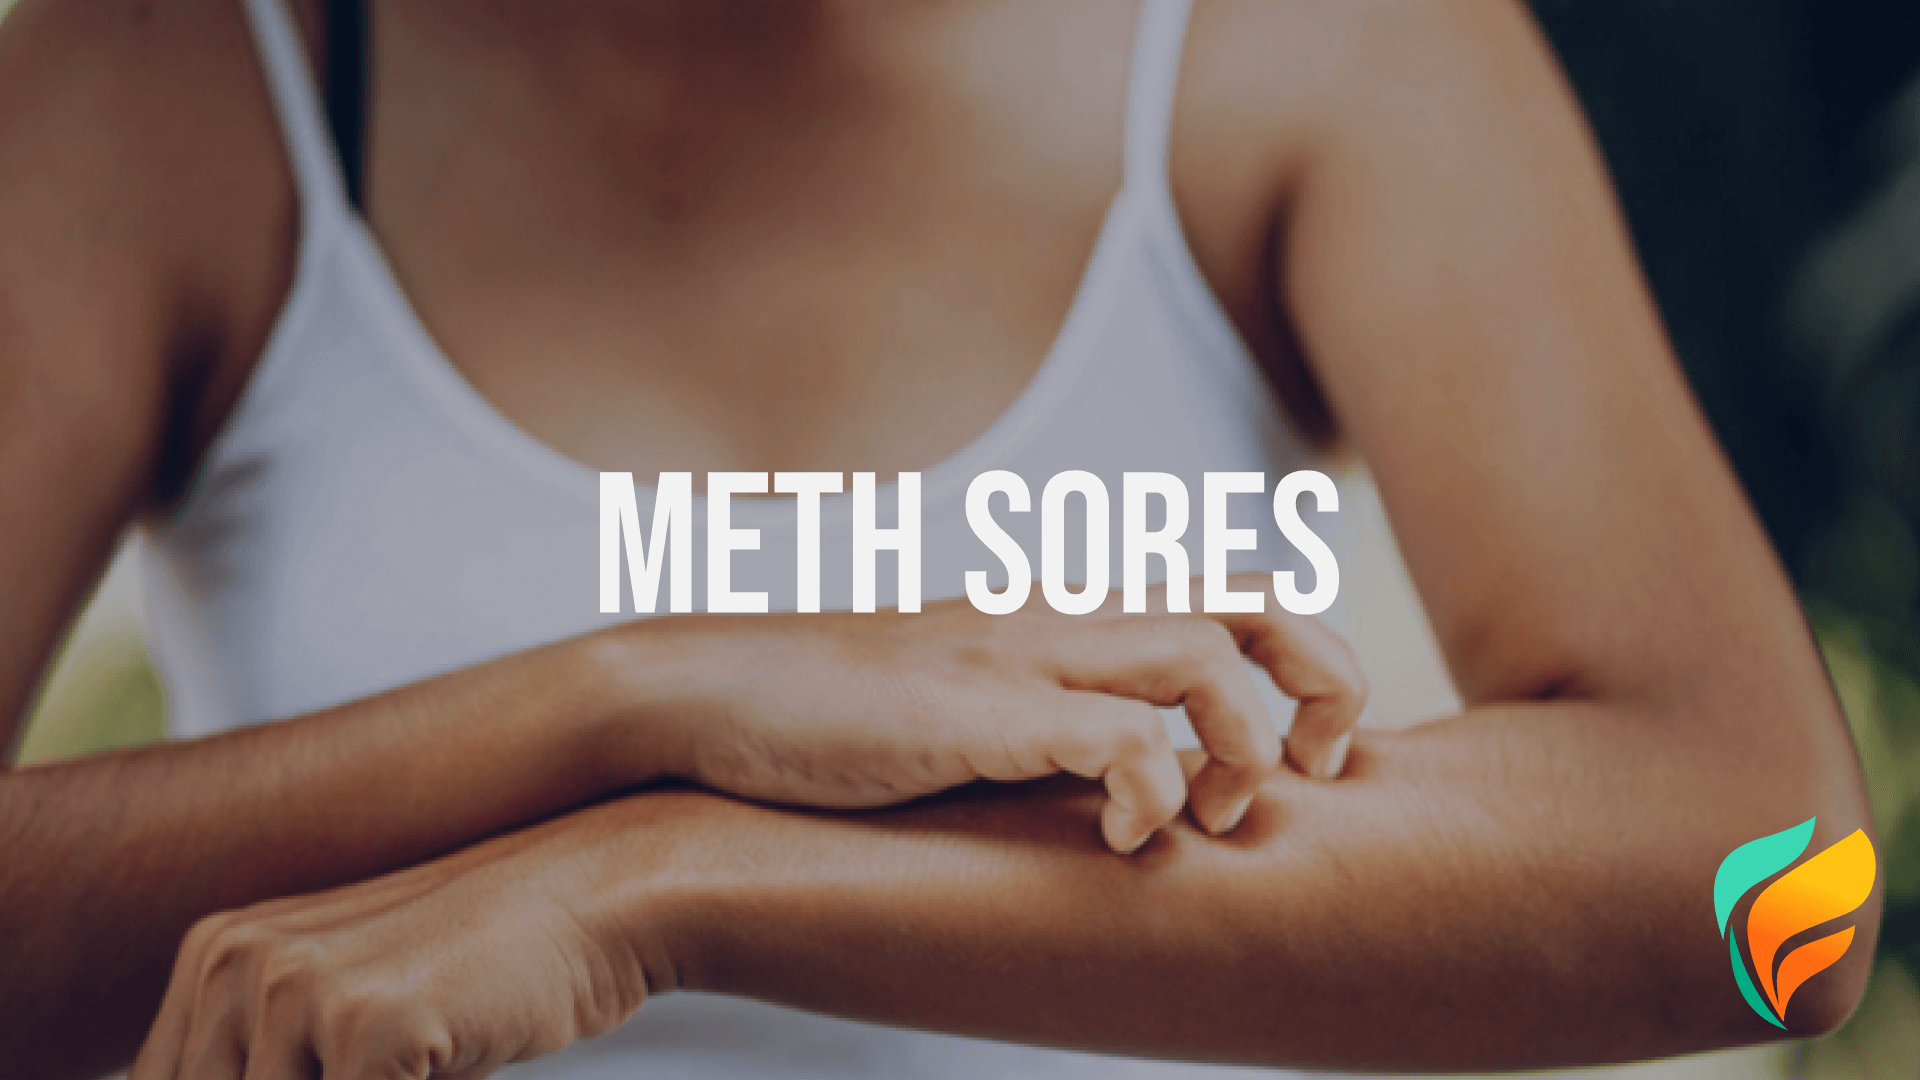 What are Meth Sores, A Painful Side Effect of Meth Abuse?